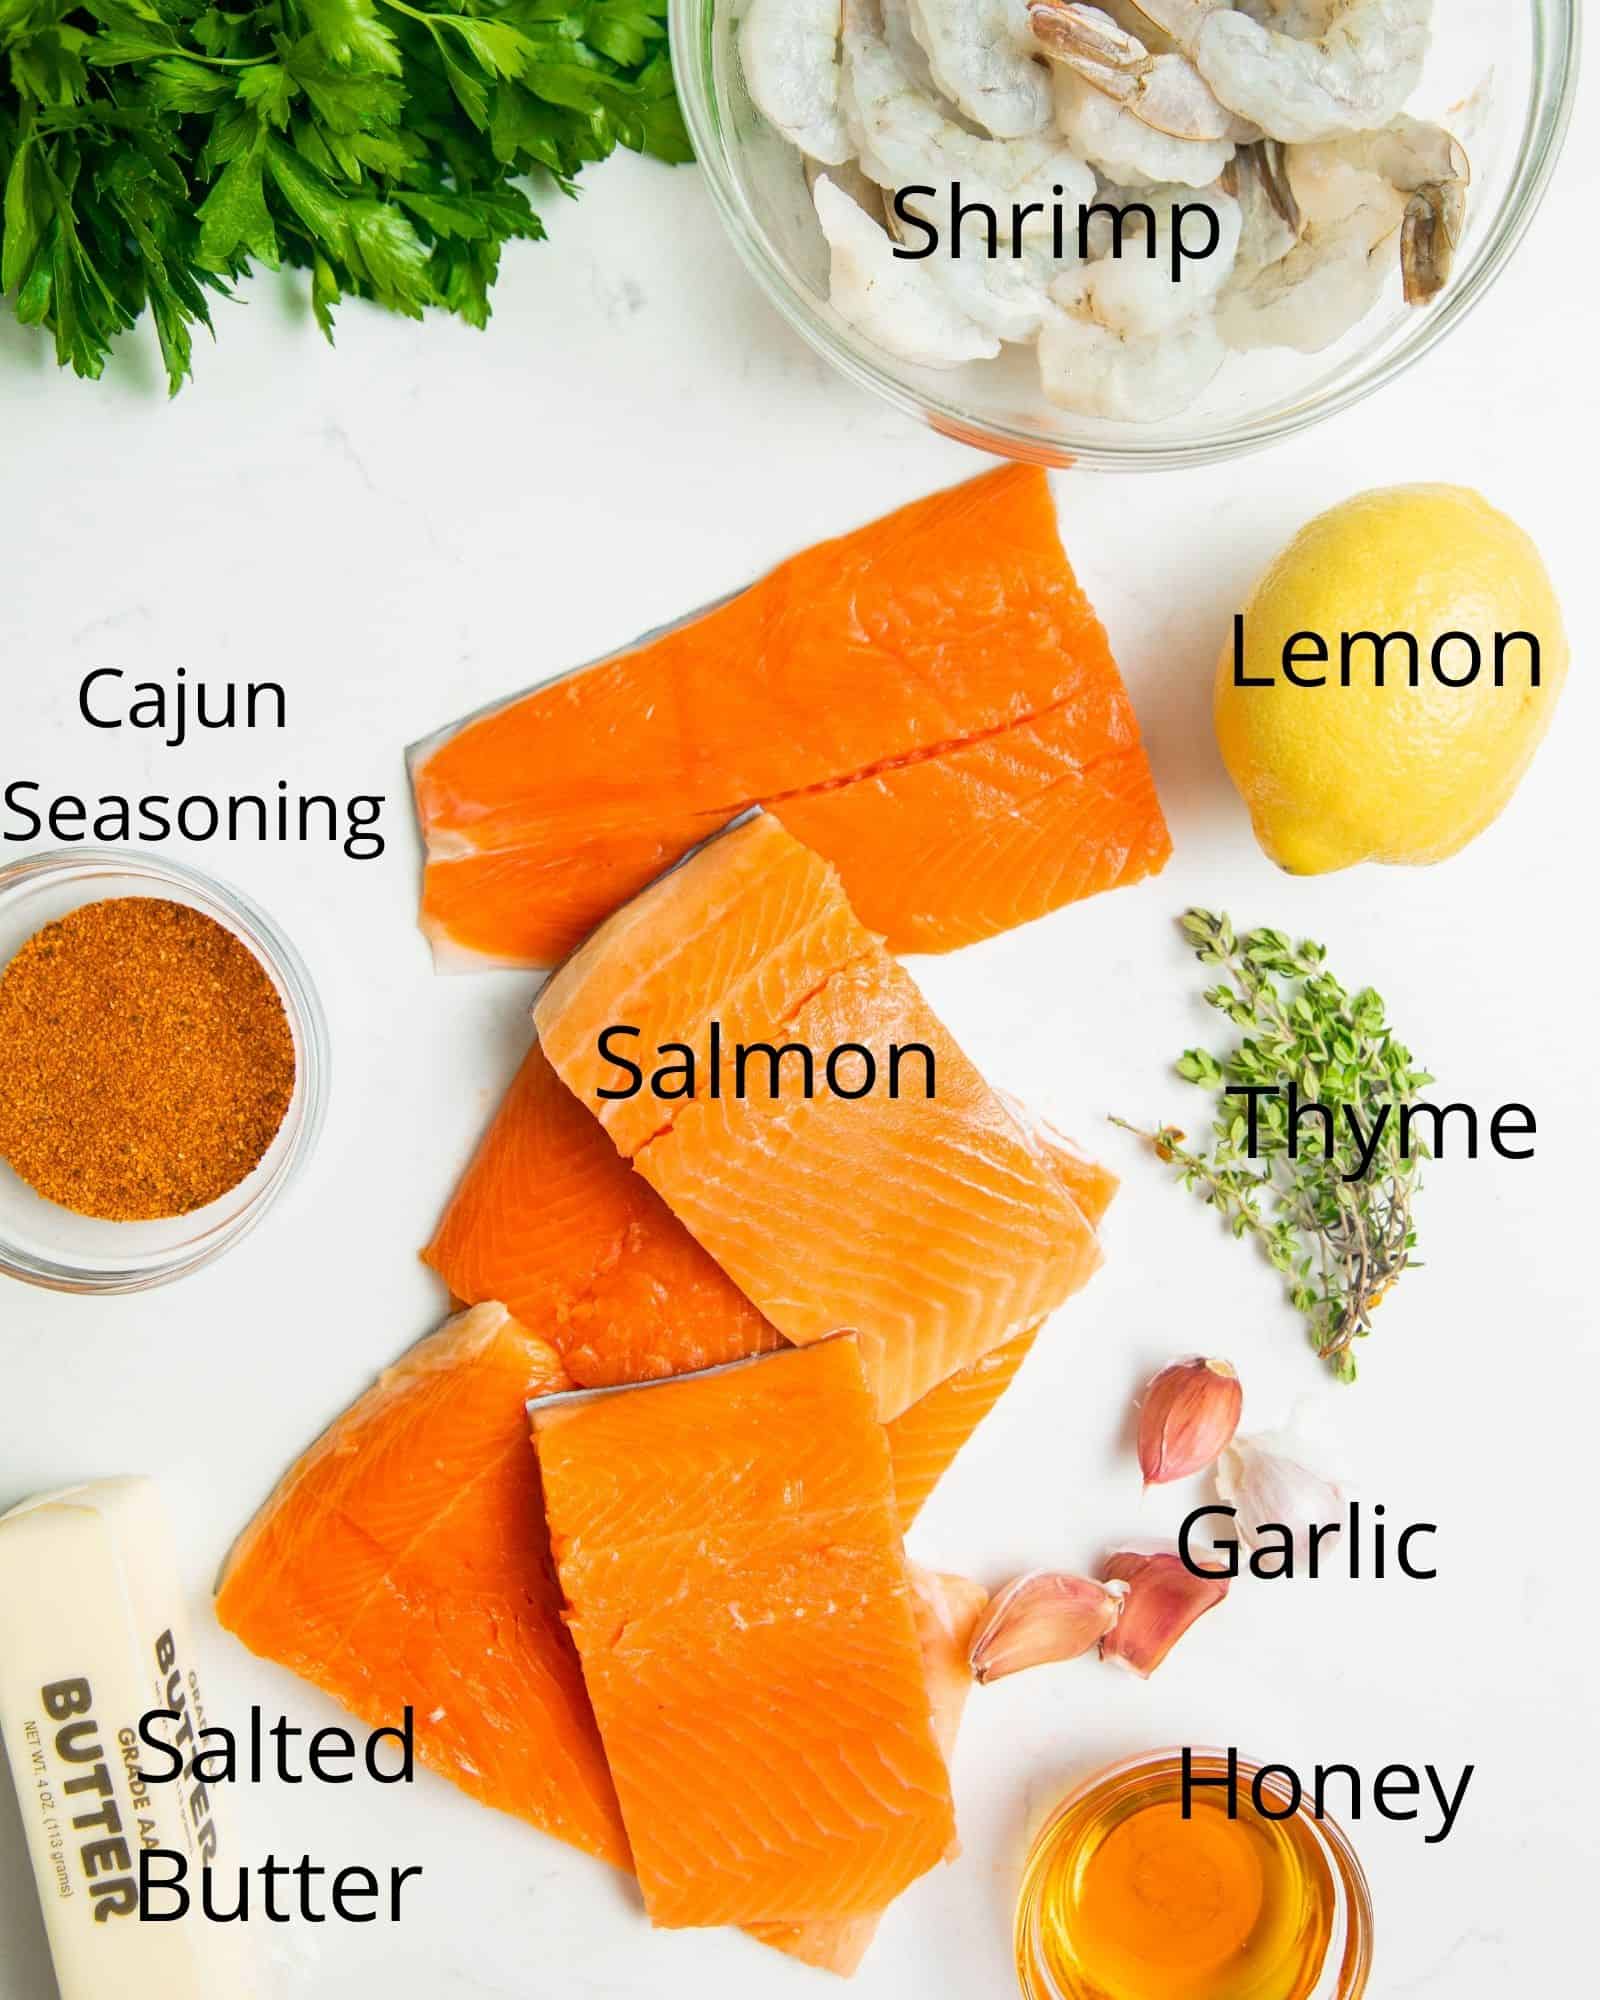 the ingredients needed to make salmon new orleans on a white surface - salmon filets, lemon, shrimp, cajun seasoning, honey, garlic, thyme, and butter